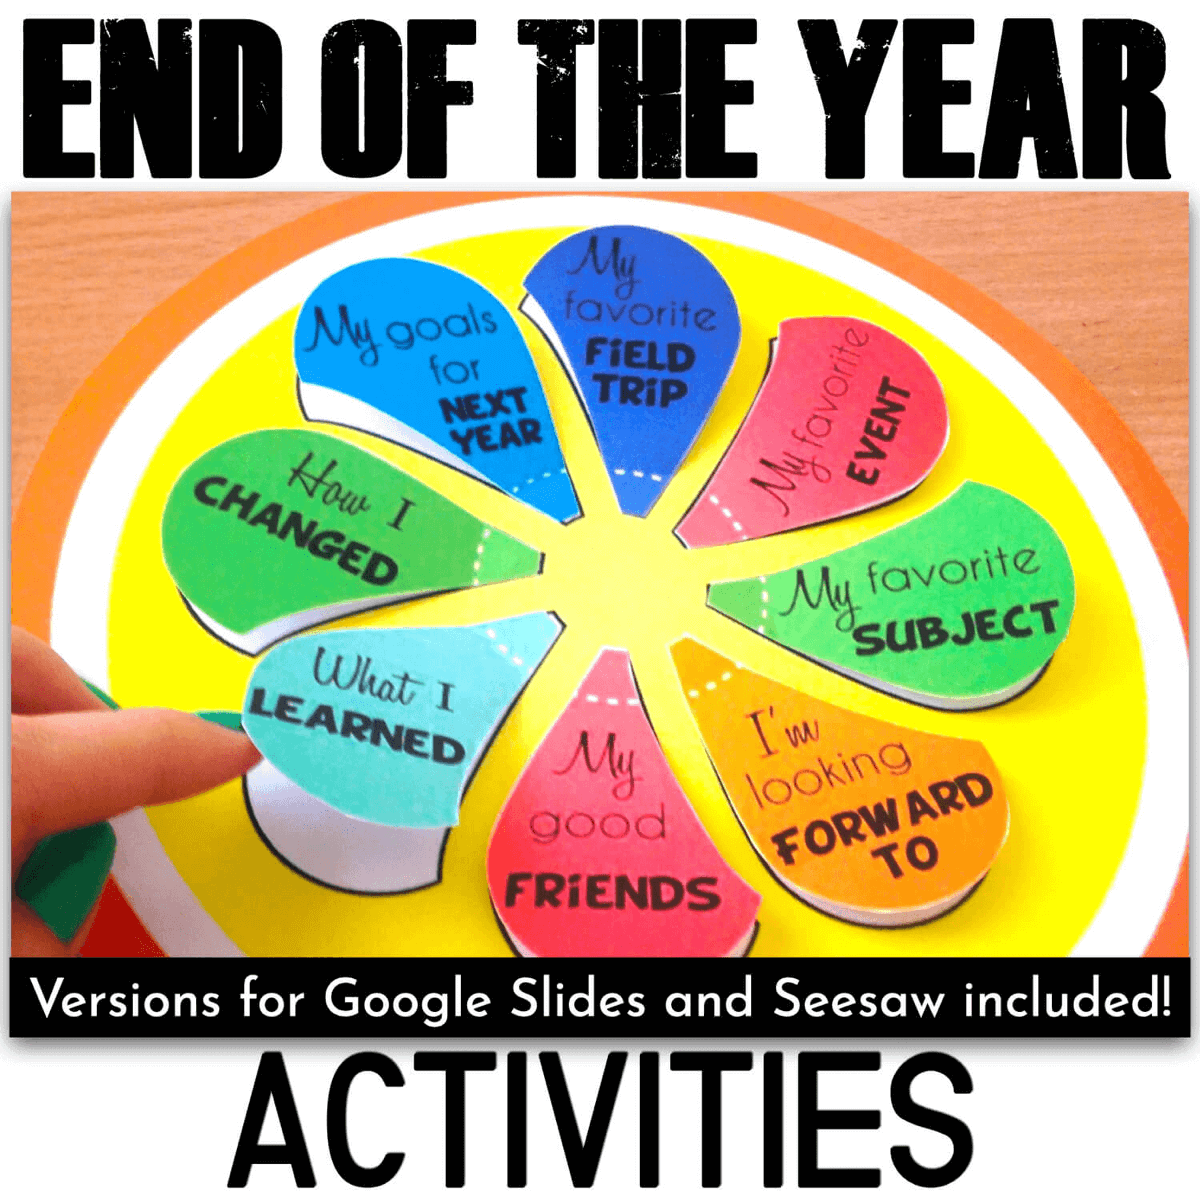 I bet you're looking for some unique activities for The End of the Year? How about a craftivity, an interactive notebook and a lollipop combined together? This is something kids will never forget!